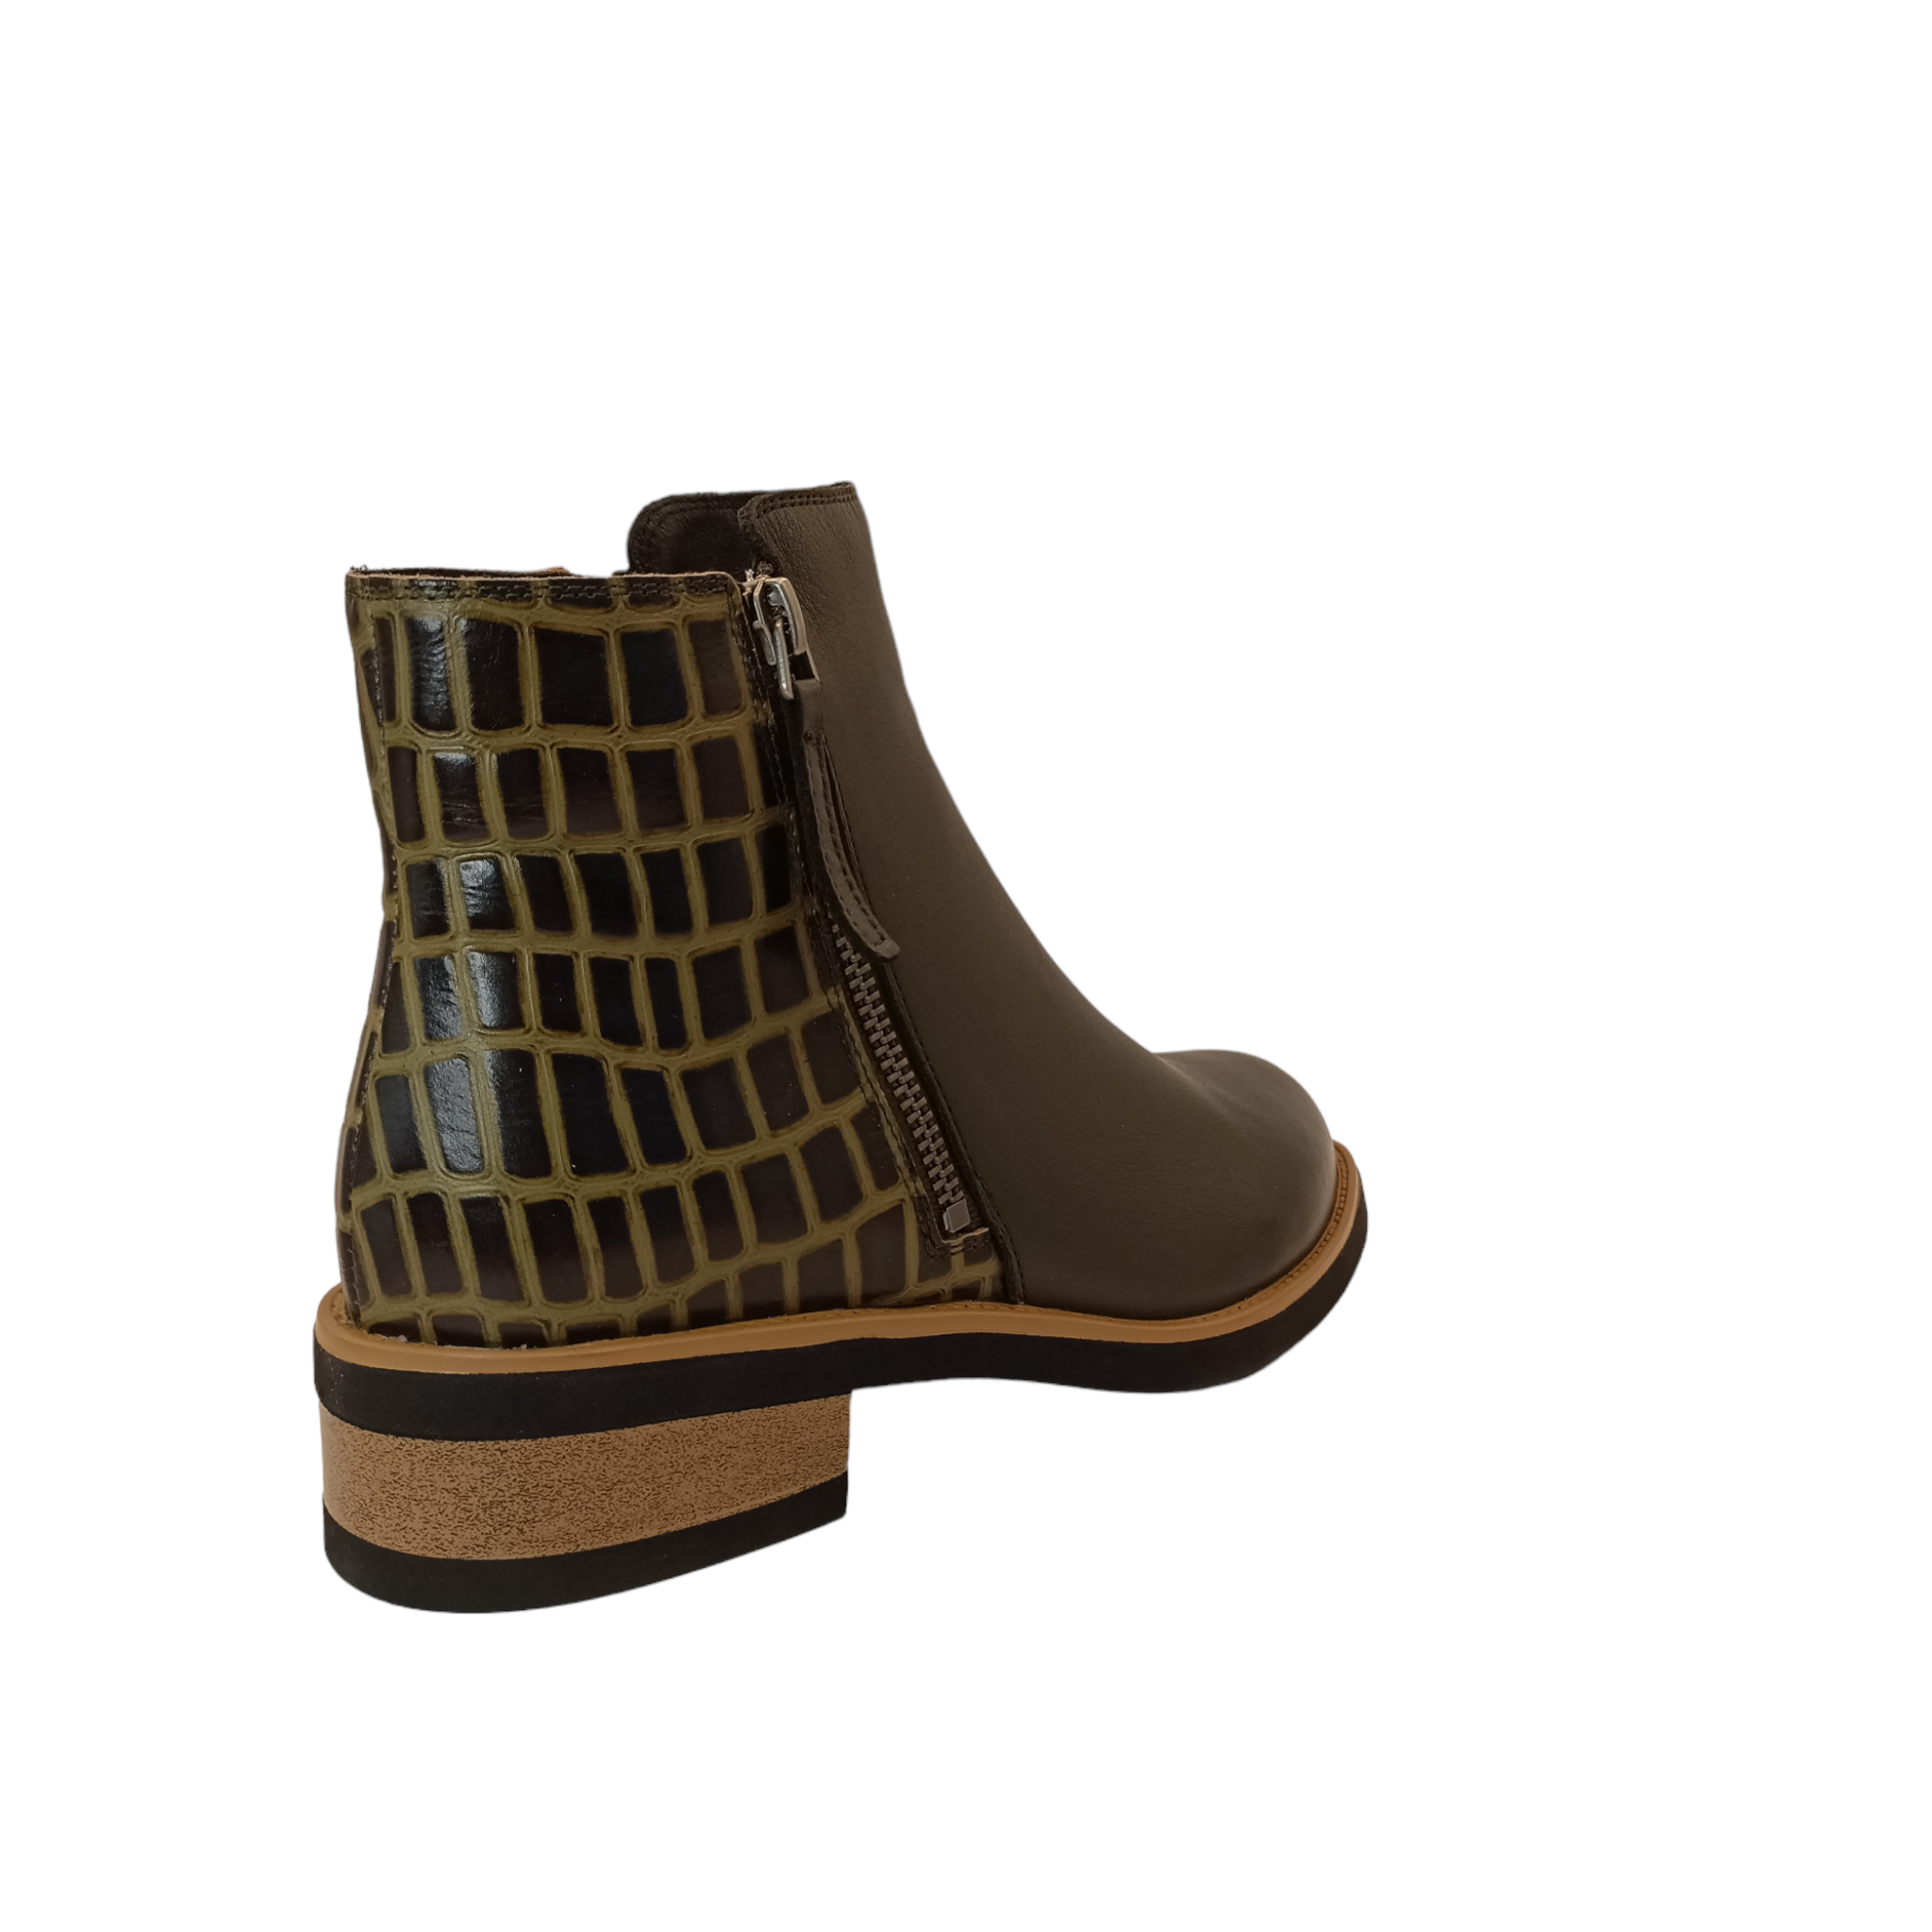 Shop Dungeon Bresley - with shoe&amp;me - from Bresley - Boots - boots, Winter, Womens - [collection]